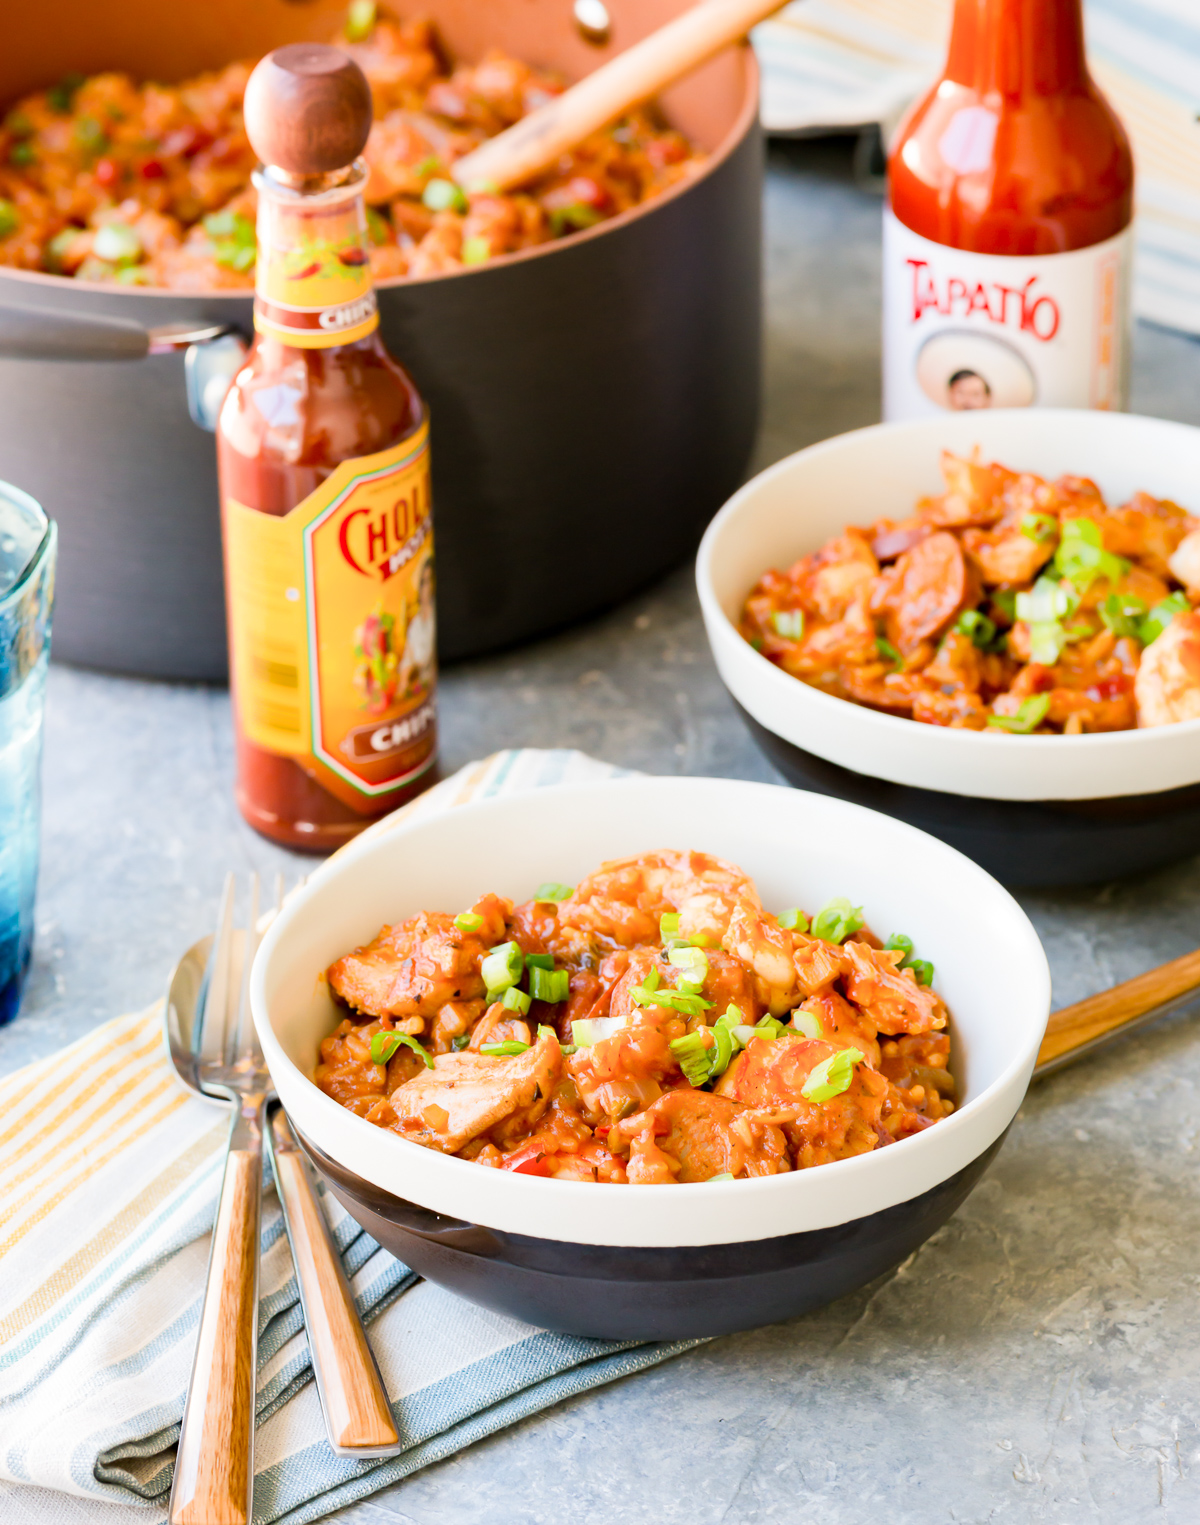 bowls of jambalaya with striped napkins forks and spoons bottle of tapatio bottle of cholula